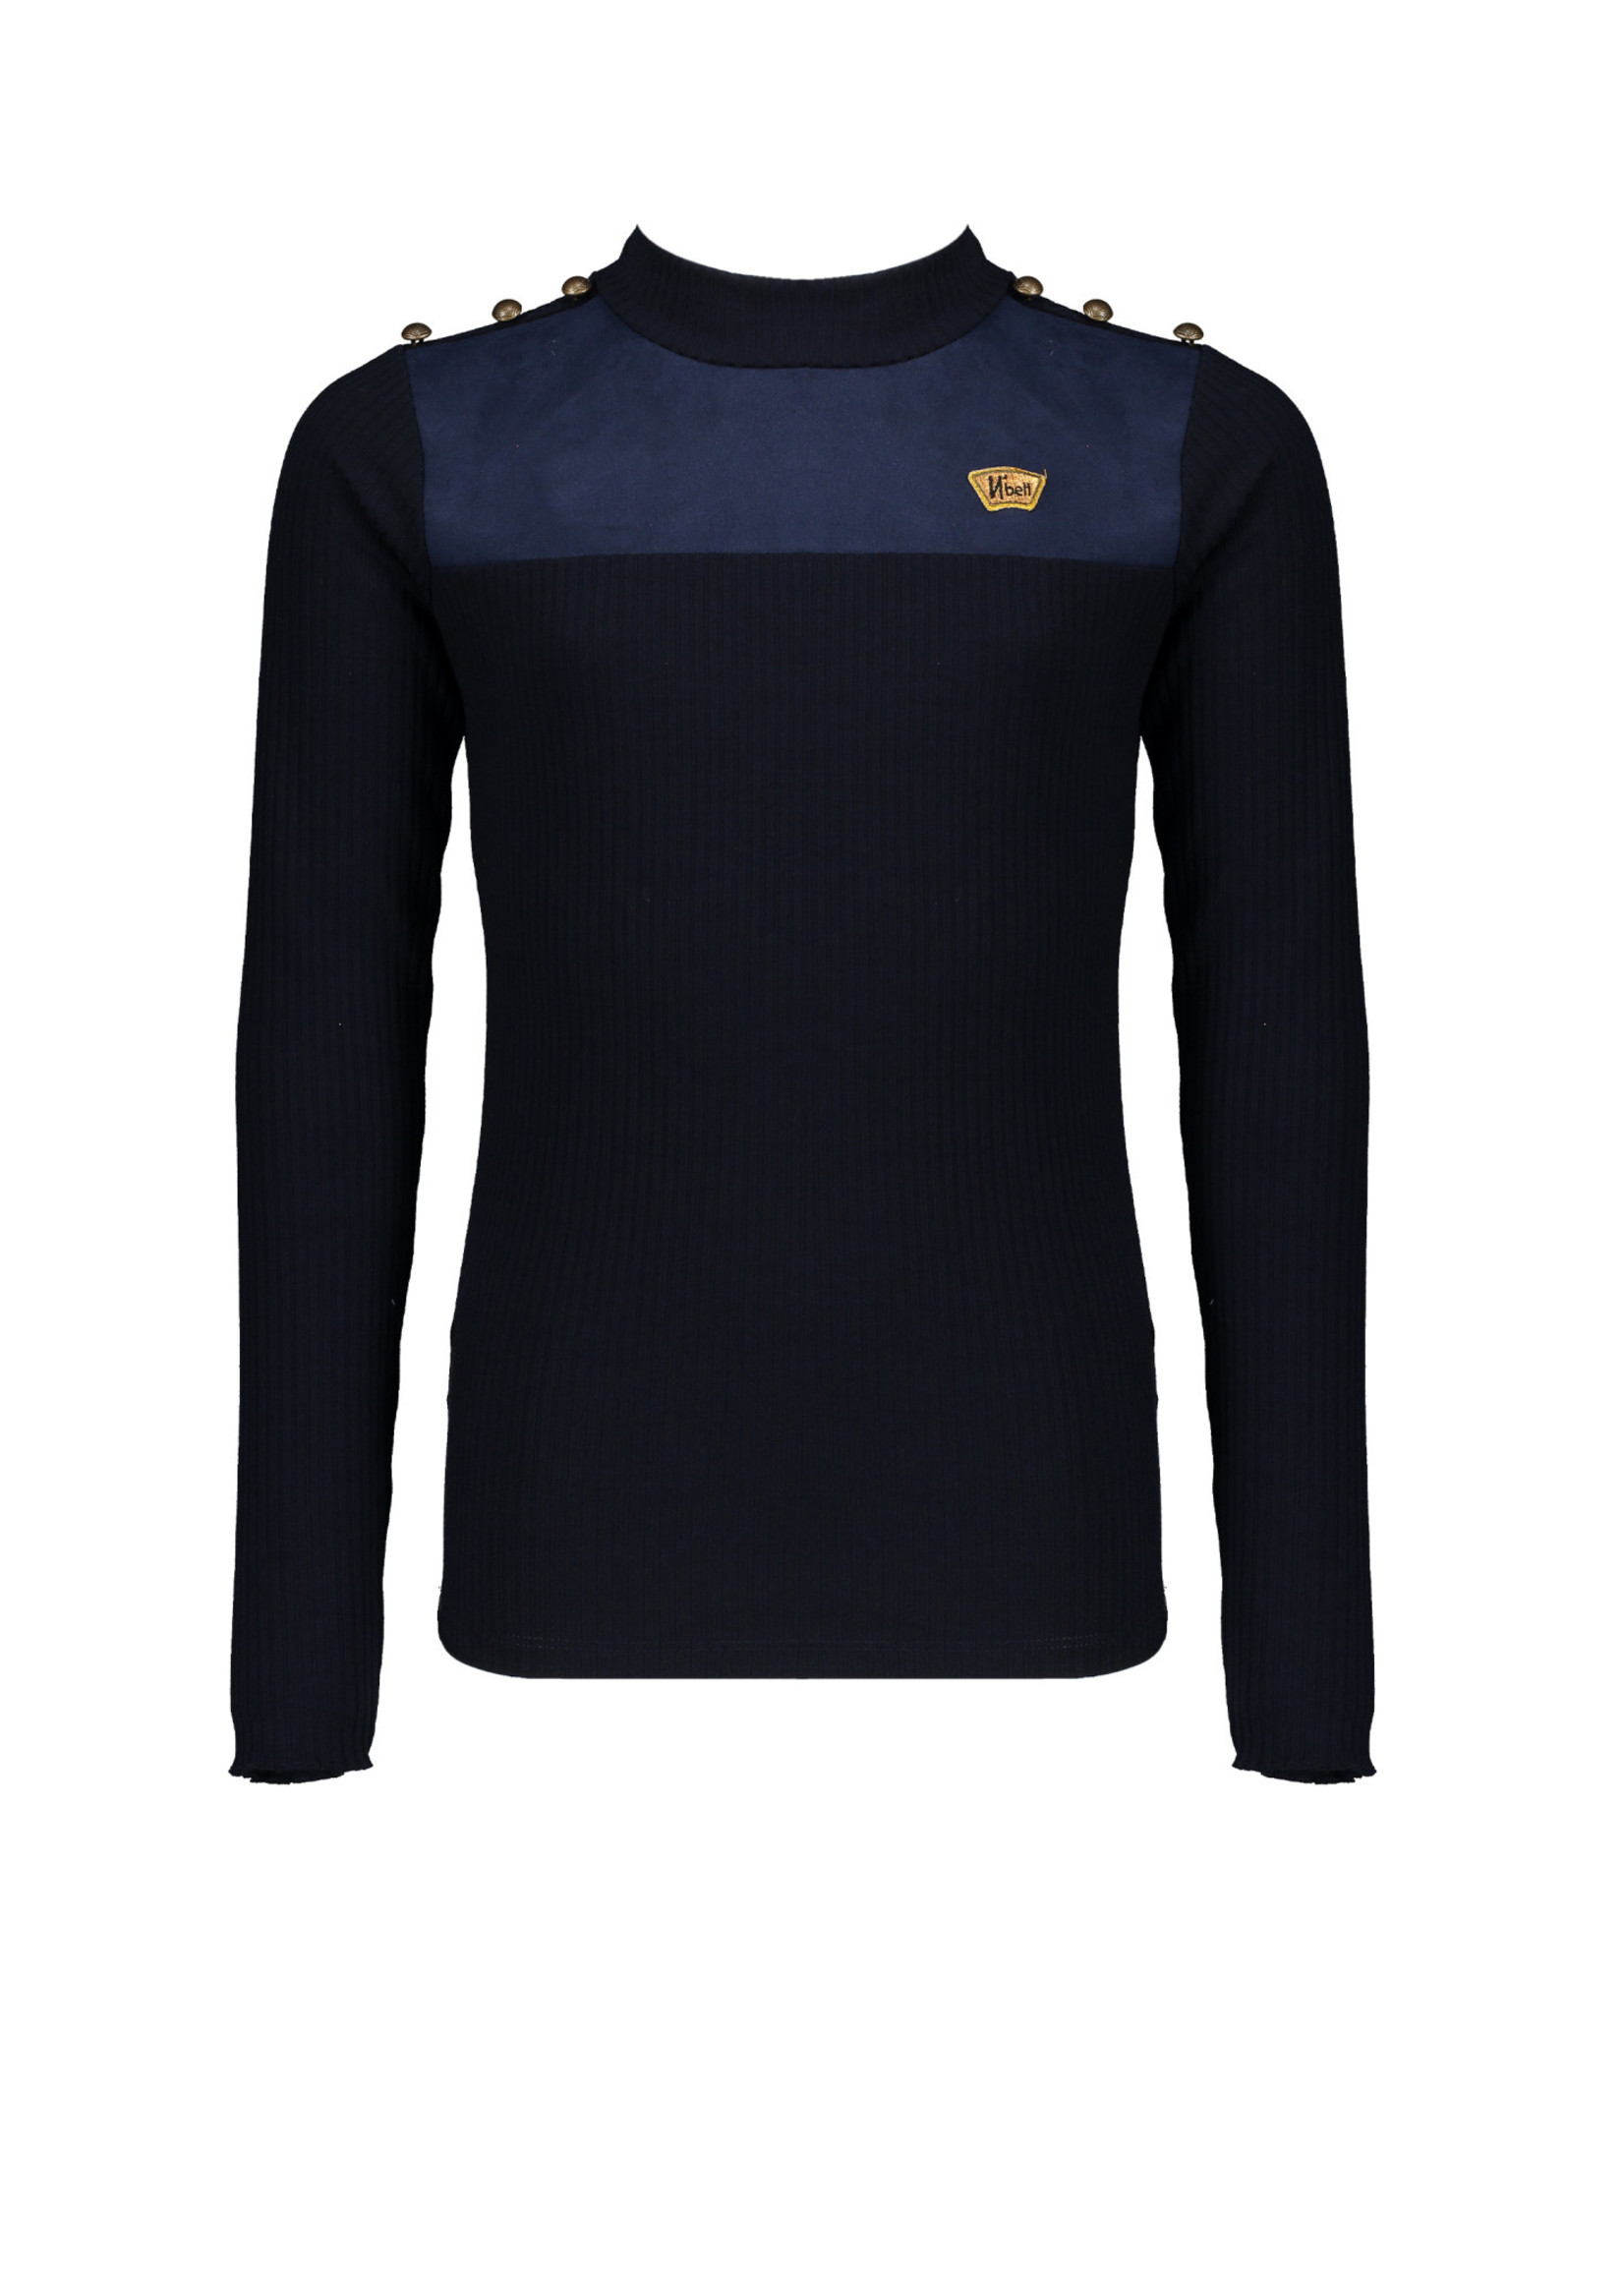 Nobell Nobell Kolet rib turtle neck tshirt with fancy buttons at shoulder Q008-3400 Grey Navy